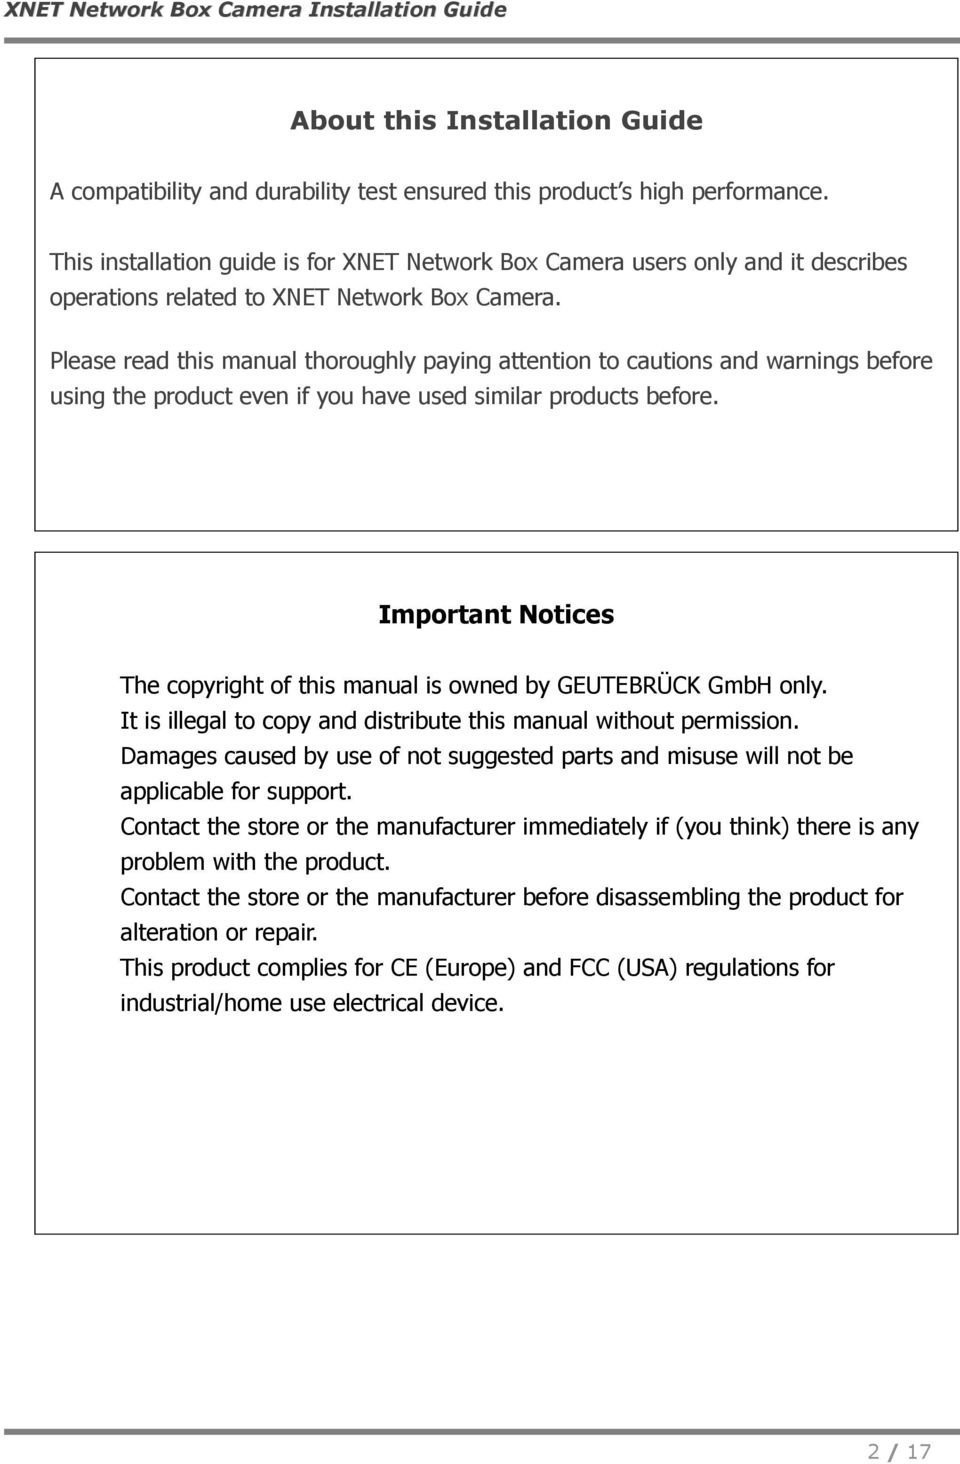 Please read this manual thoroughly paying attention to cautions and warnings before using the product even if you have used similar products before.